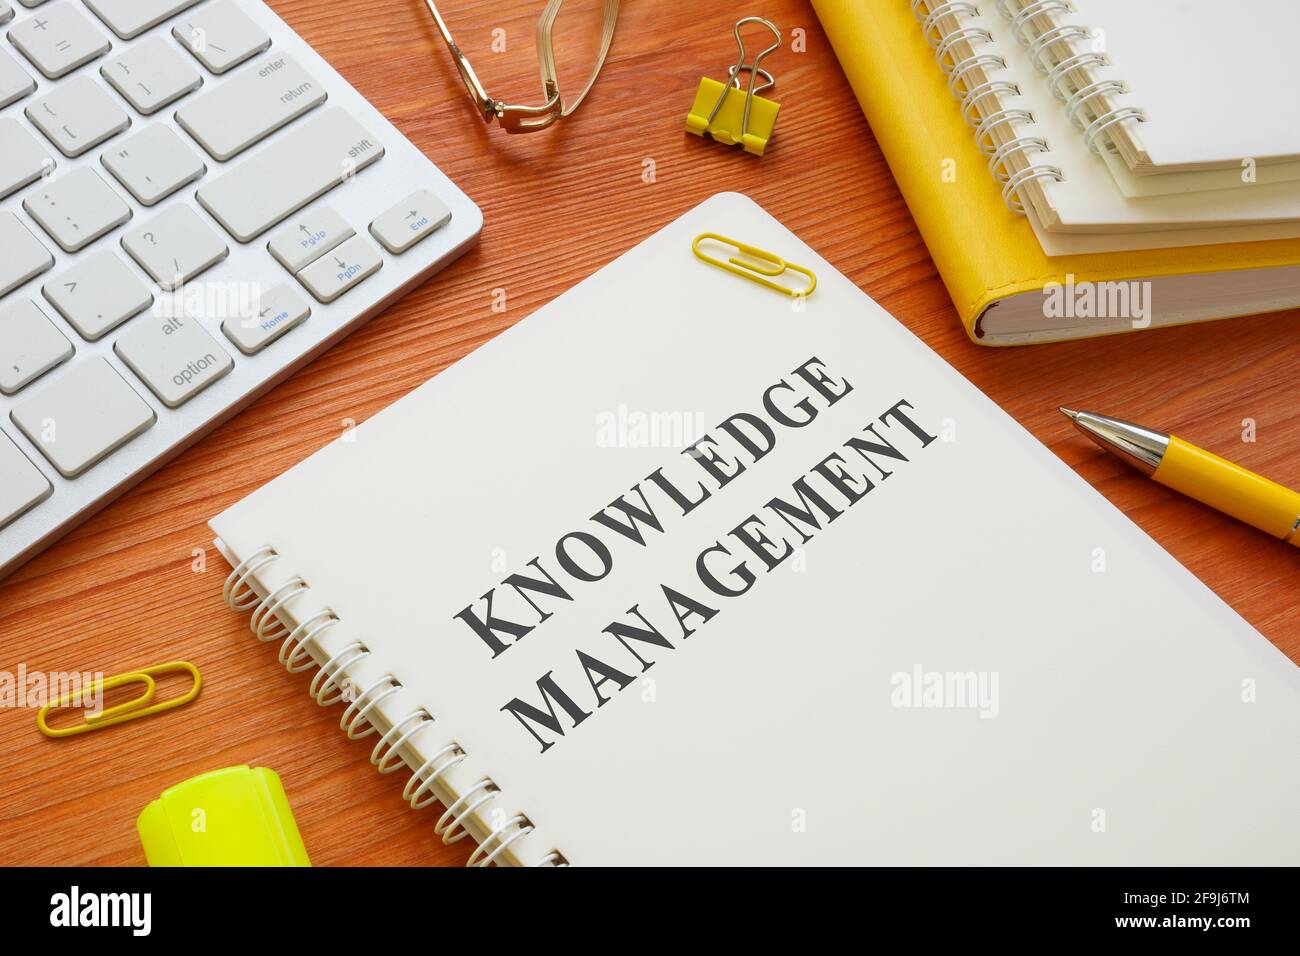 The guide about Knowledge management and keyboard. Stock Photo